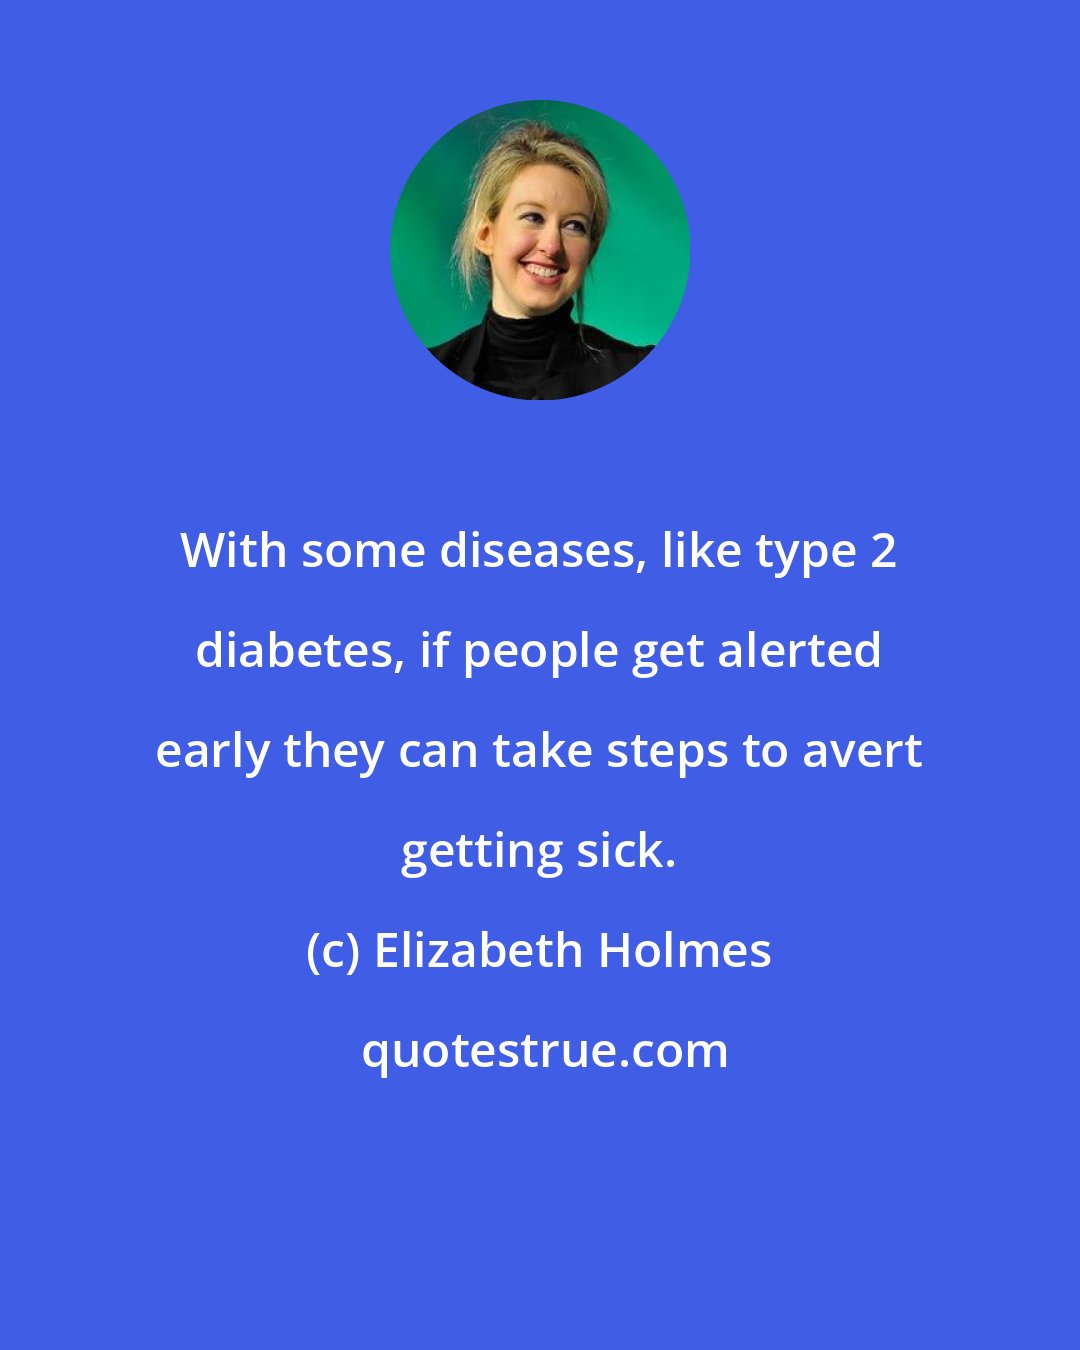 Elizabeth Holmes: With some diseases, like type 2 diabetes, if people get alerted early they can take steps to avert getting sick.